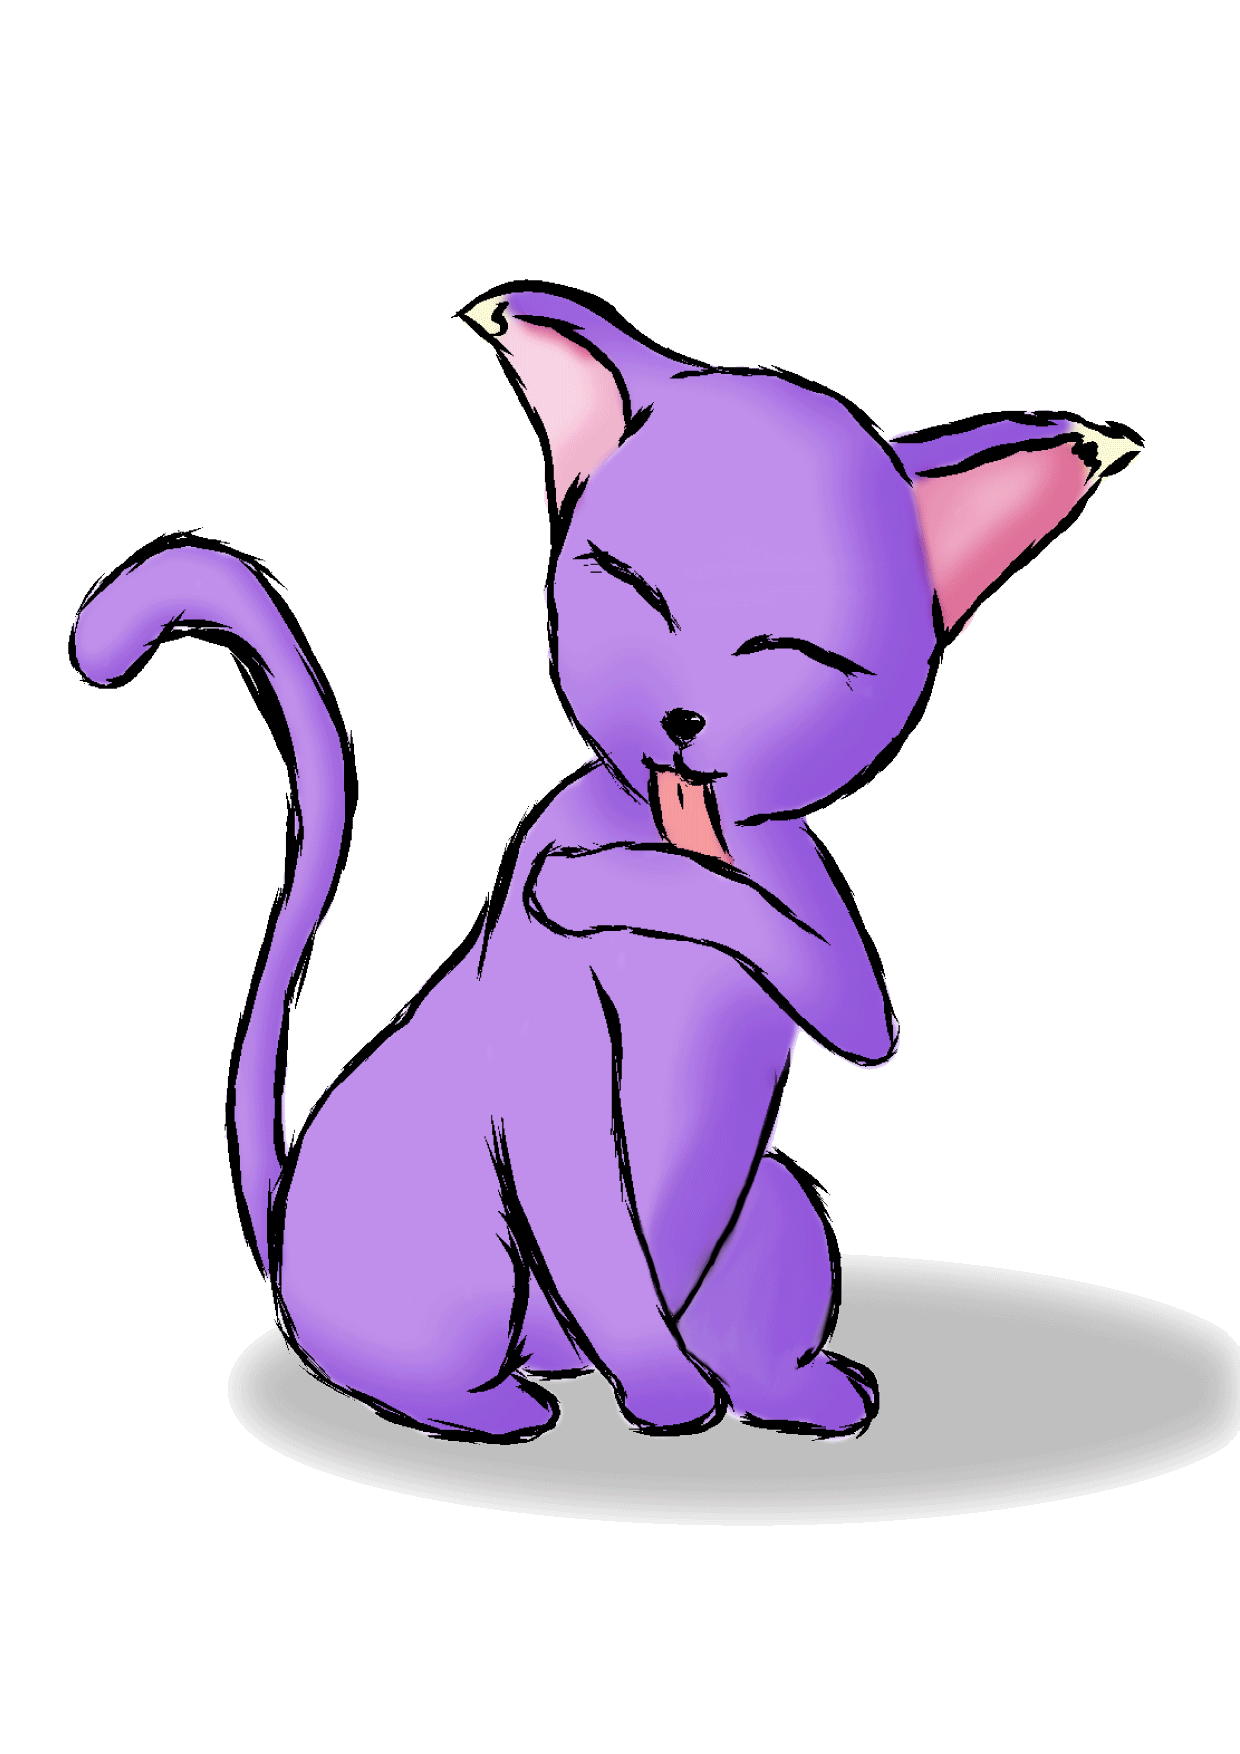 moving cat clipart - photo #31